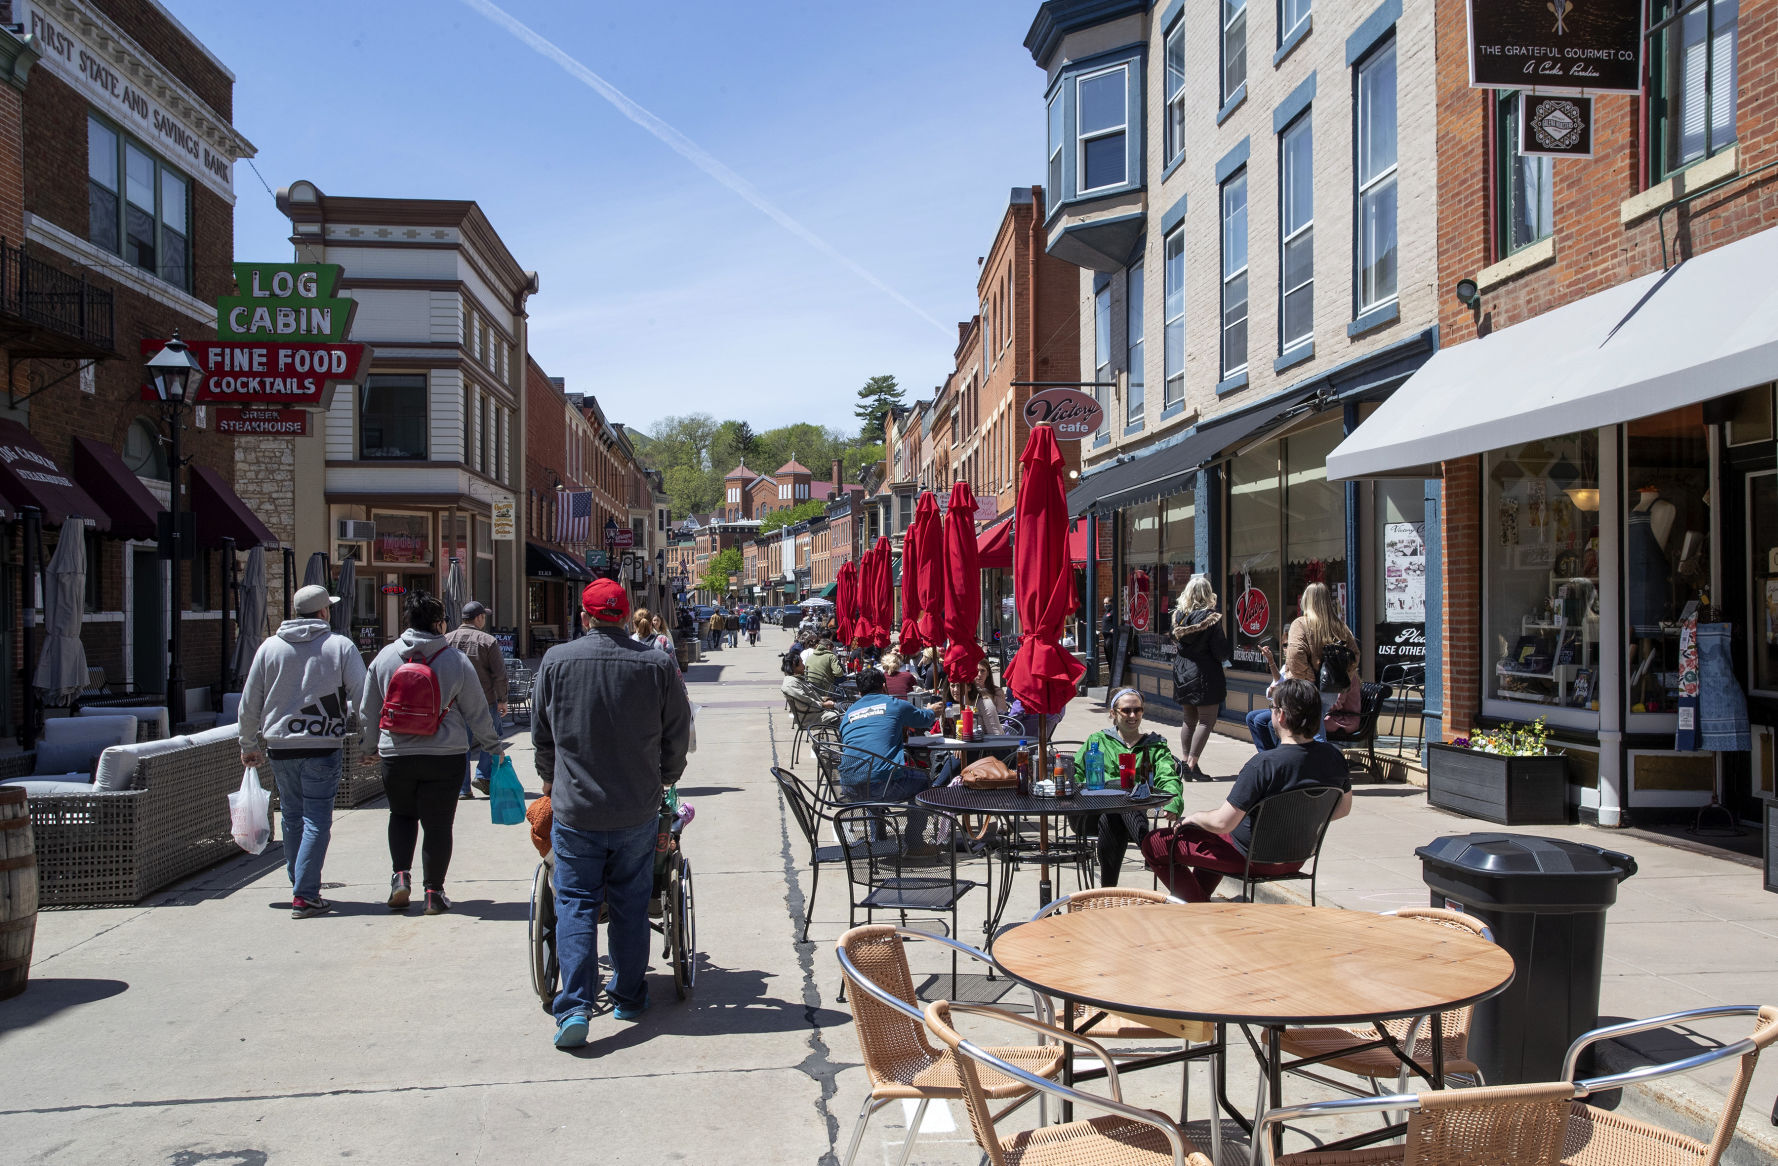 People enjoy shopping and dining on Mother’s Day on Main Street in Galena, Ill. PHOTO CREDIT: Telegraph Herald